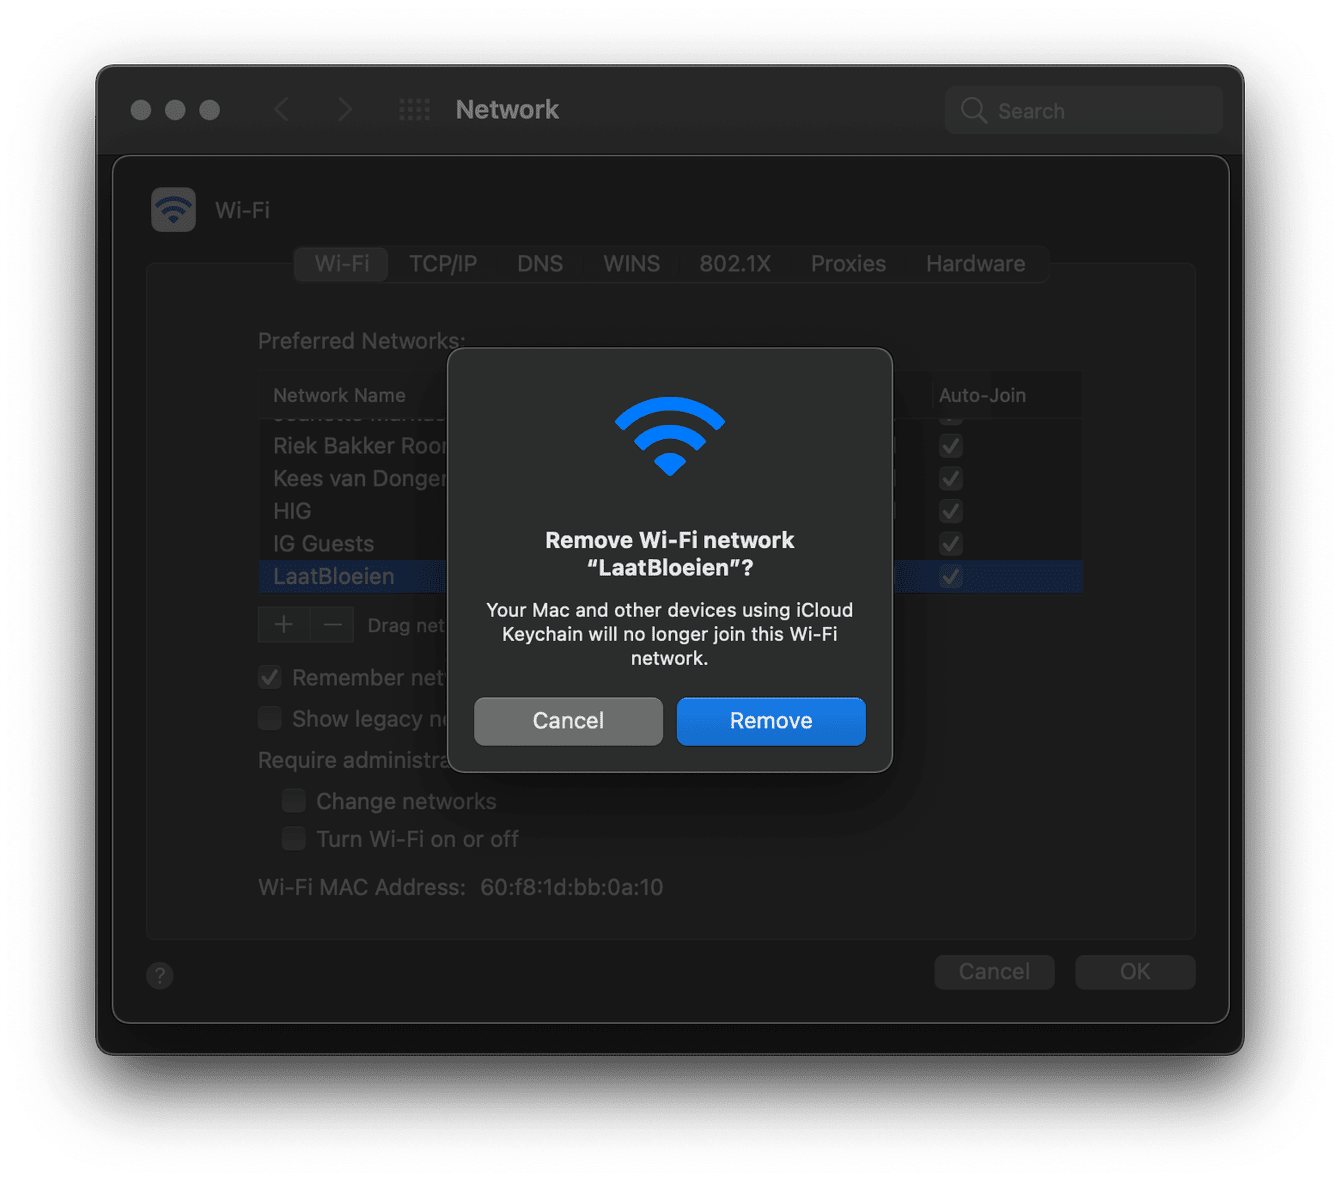 Removing the Wi-Fi network